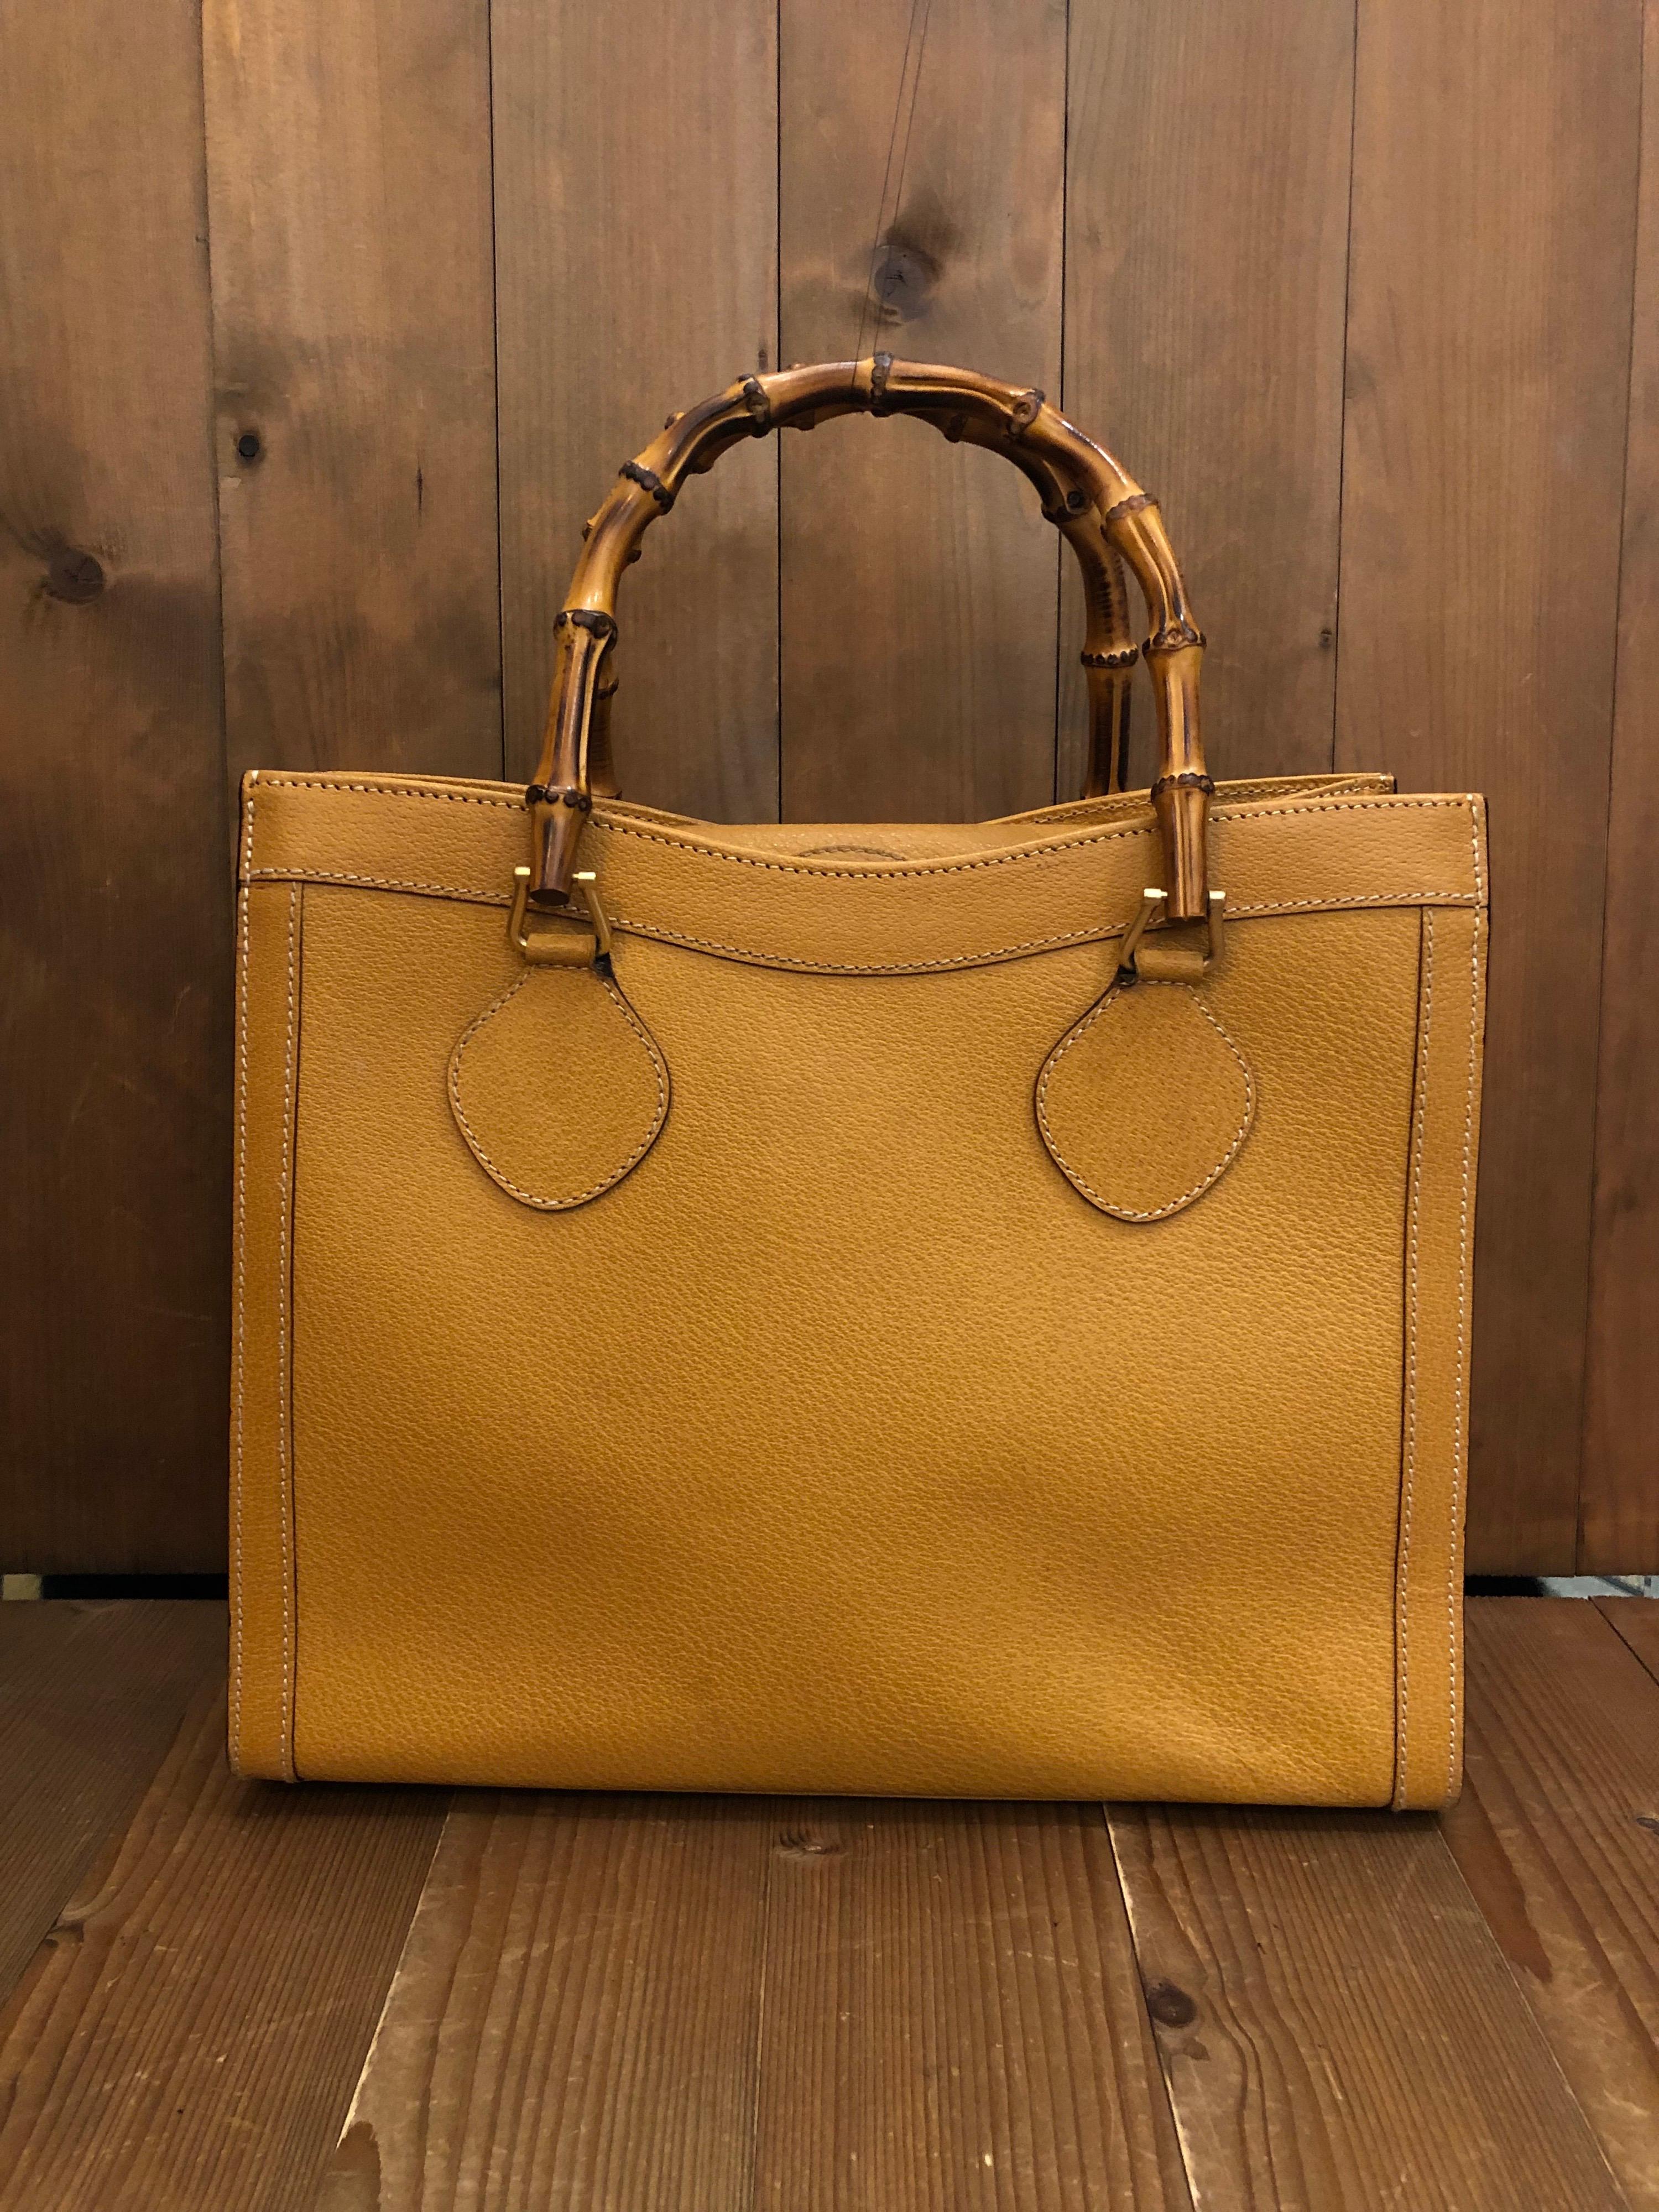 1990s Gucci bamboo tote in mustard yellow leather. The Bamboo tote is one of Princess Diana's favorite purses. Gucci revamped this Bamboo tote in 2021 winter collection. Made in Italy. Measures 13 x 11 x 5.5 inches handle drop 5 inches. It features